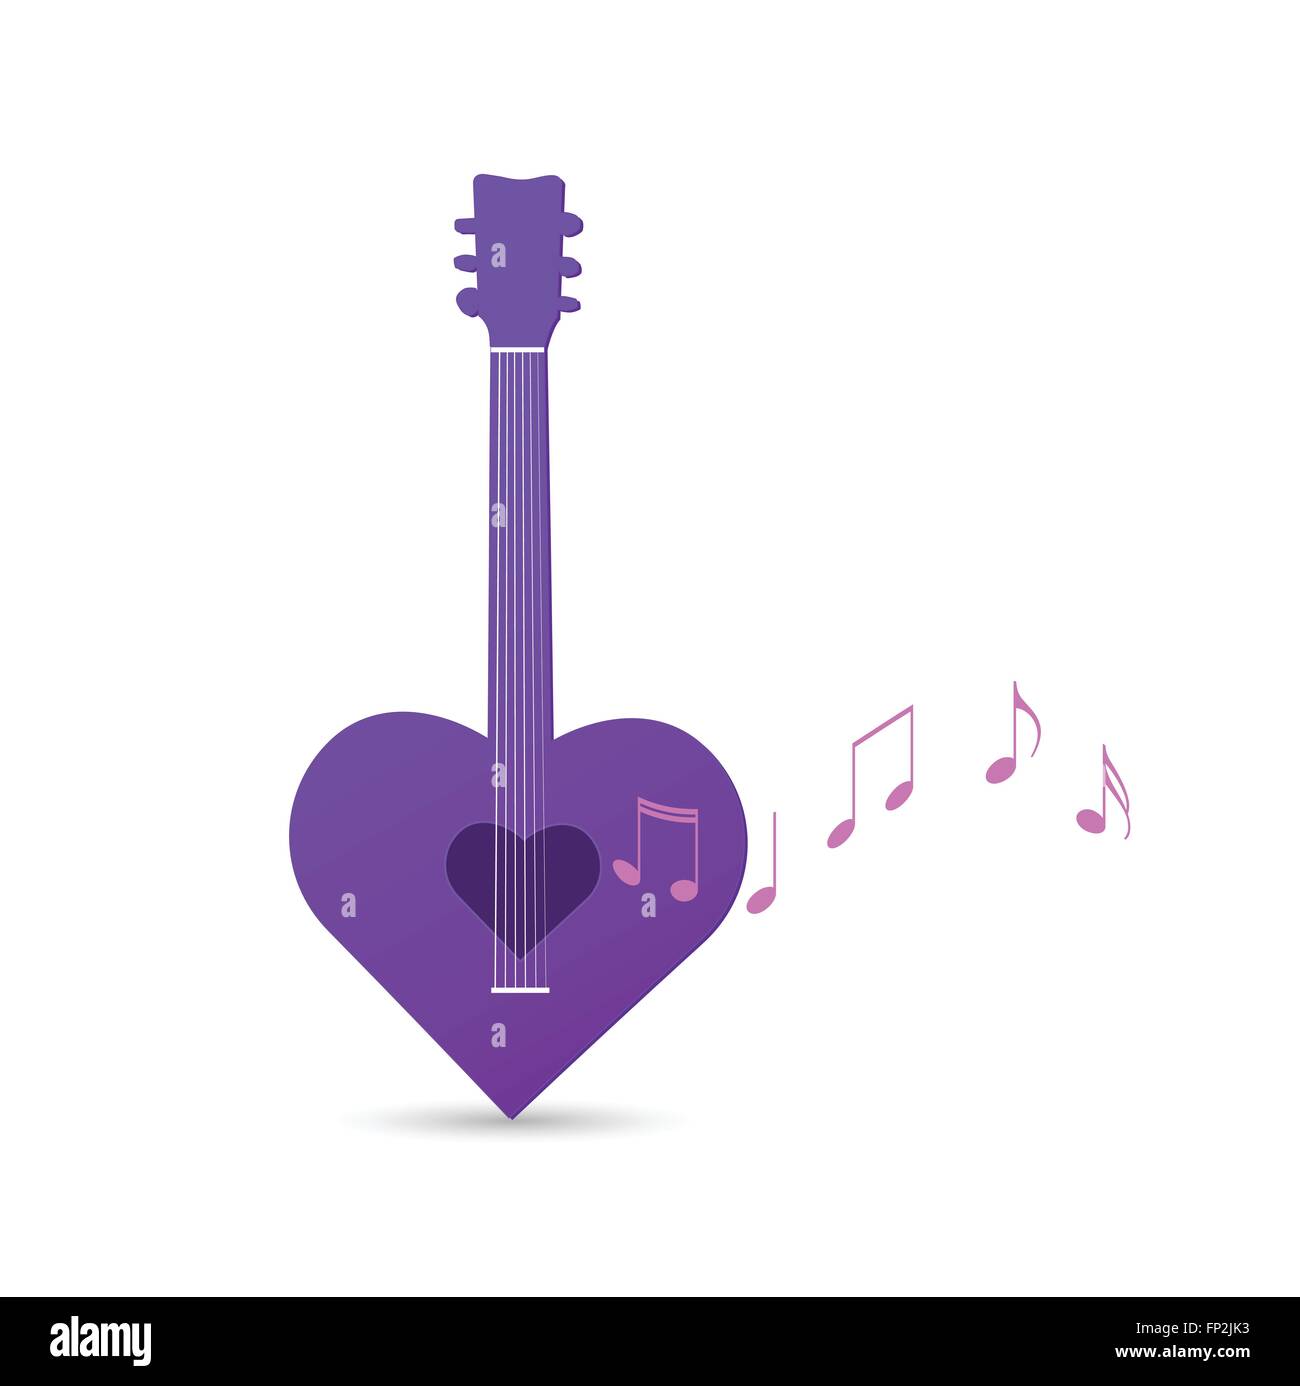 Illustration of an abstract heart guitar isolated on a white background. Stock Vector